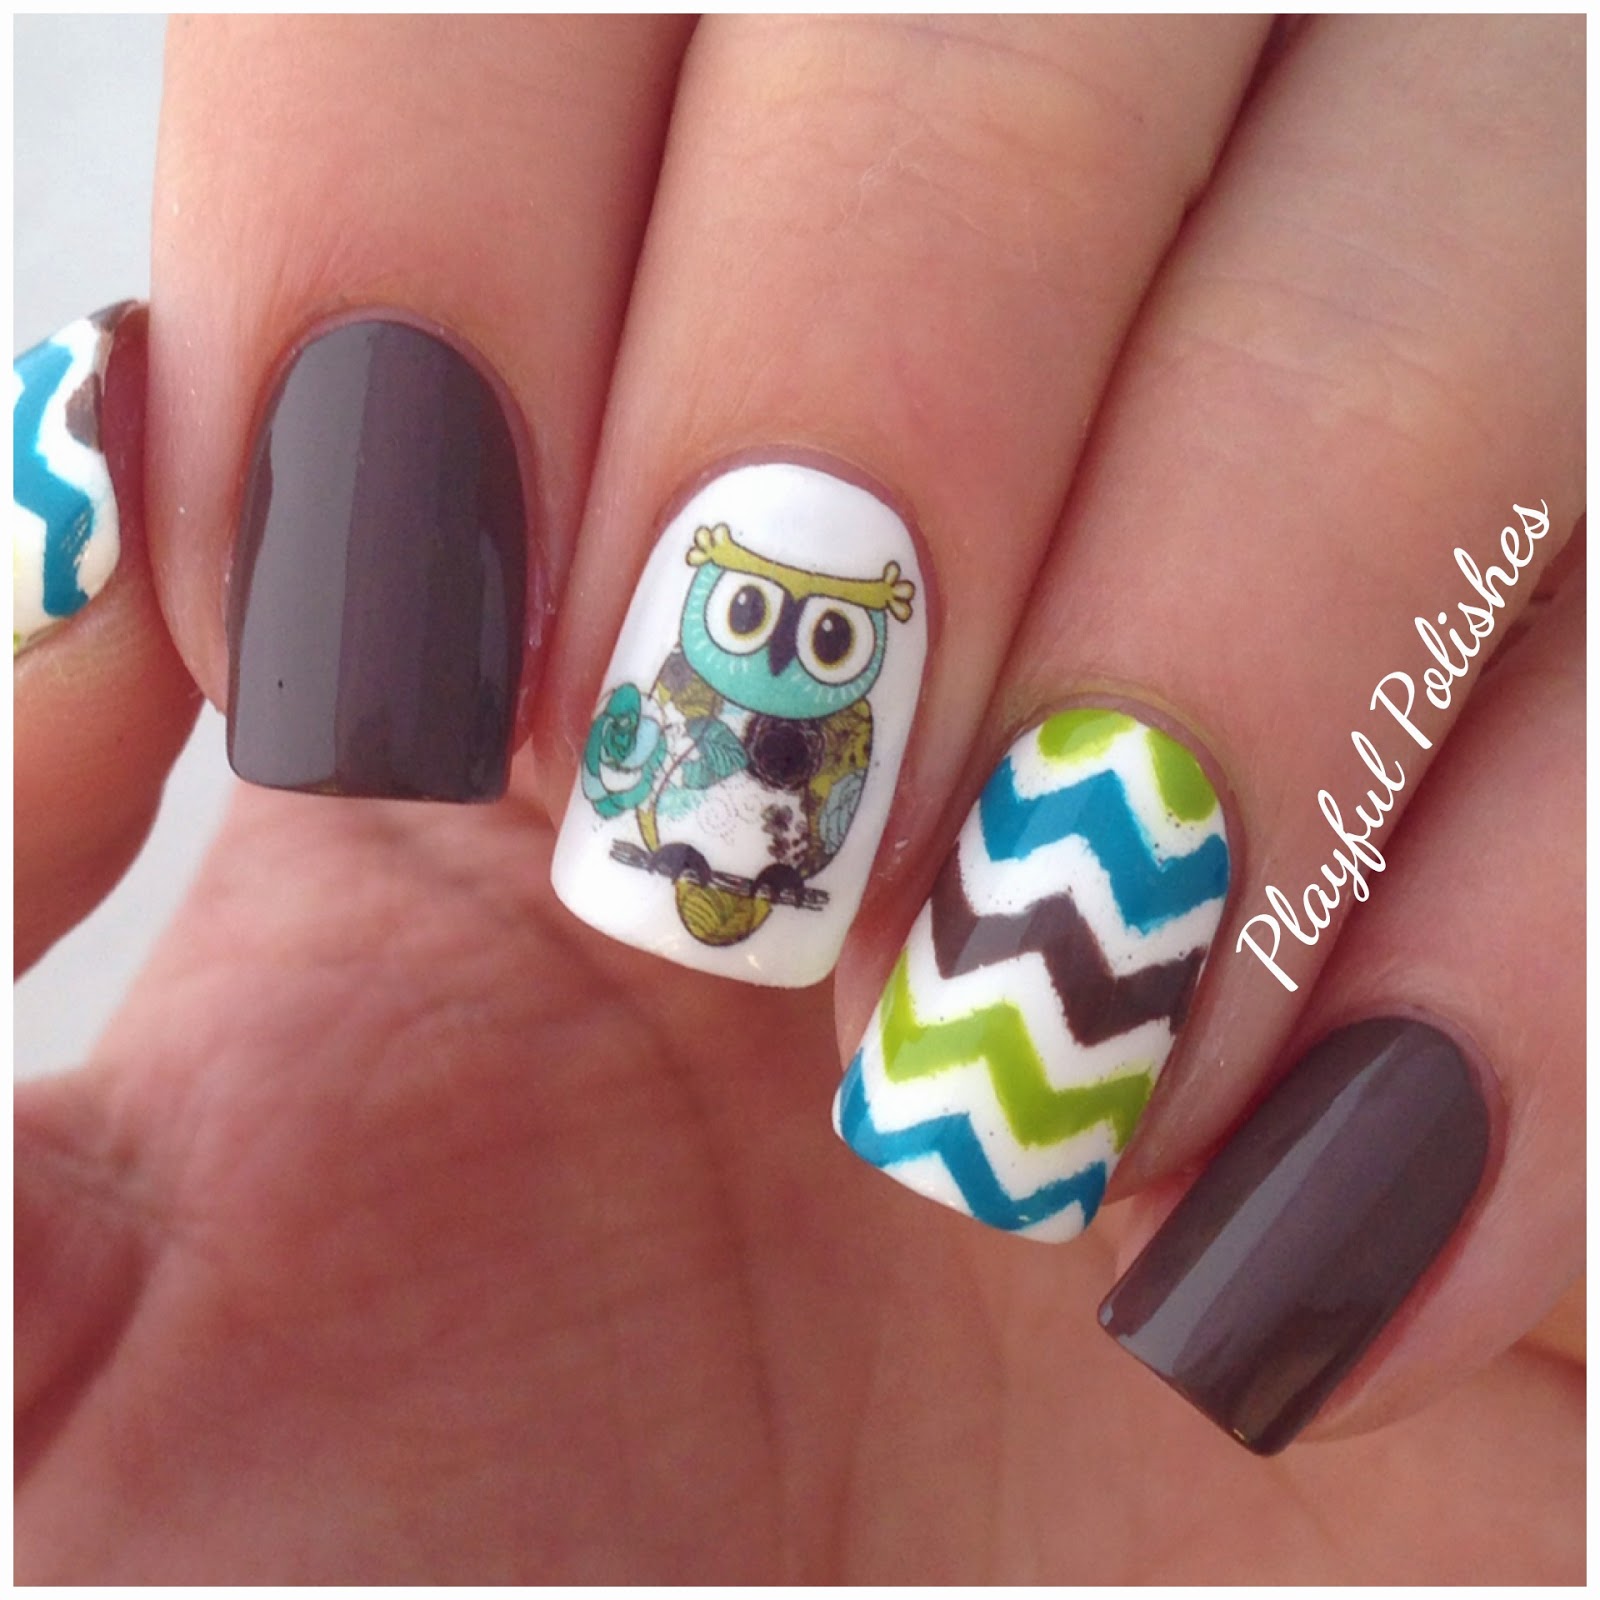 Playful Polishes: OWL NAIL ART/WATER DECALS + COUPON!!